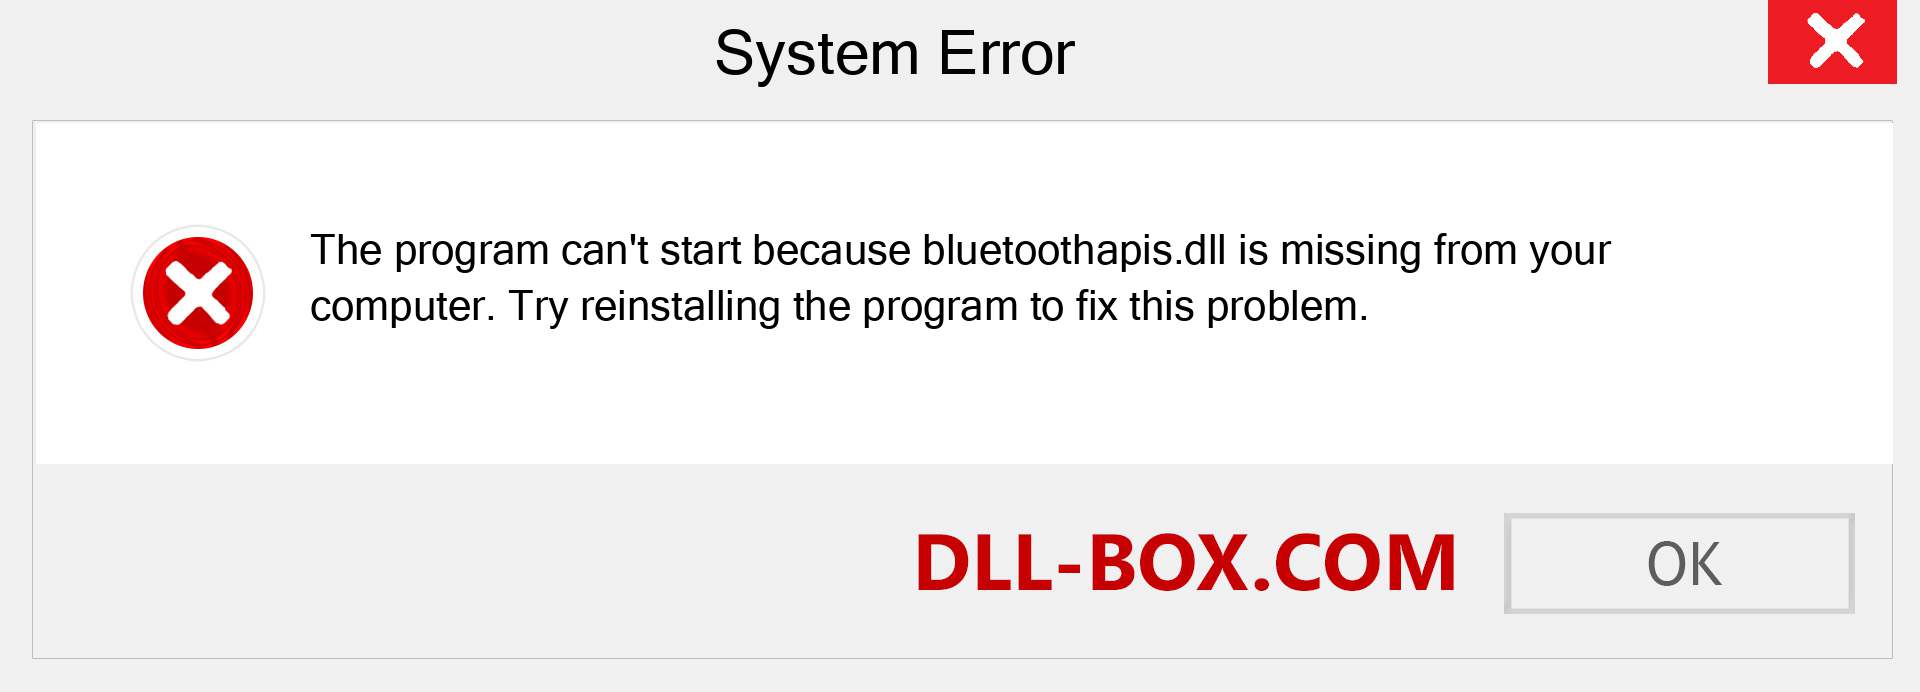  bluetoothapis.dll file is missing?. Download for Windows 7, 8, 10 - Fix  bluetoothapis dll Missing Error on Windows, photos, images